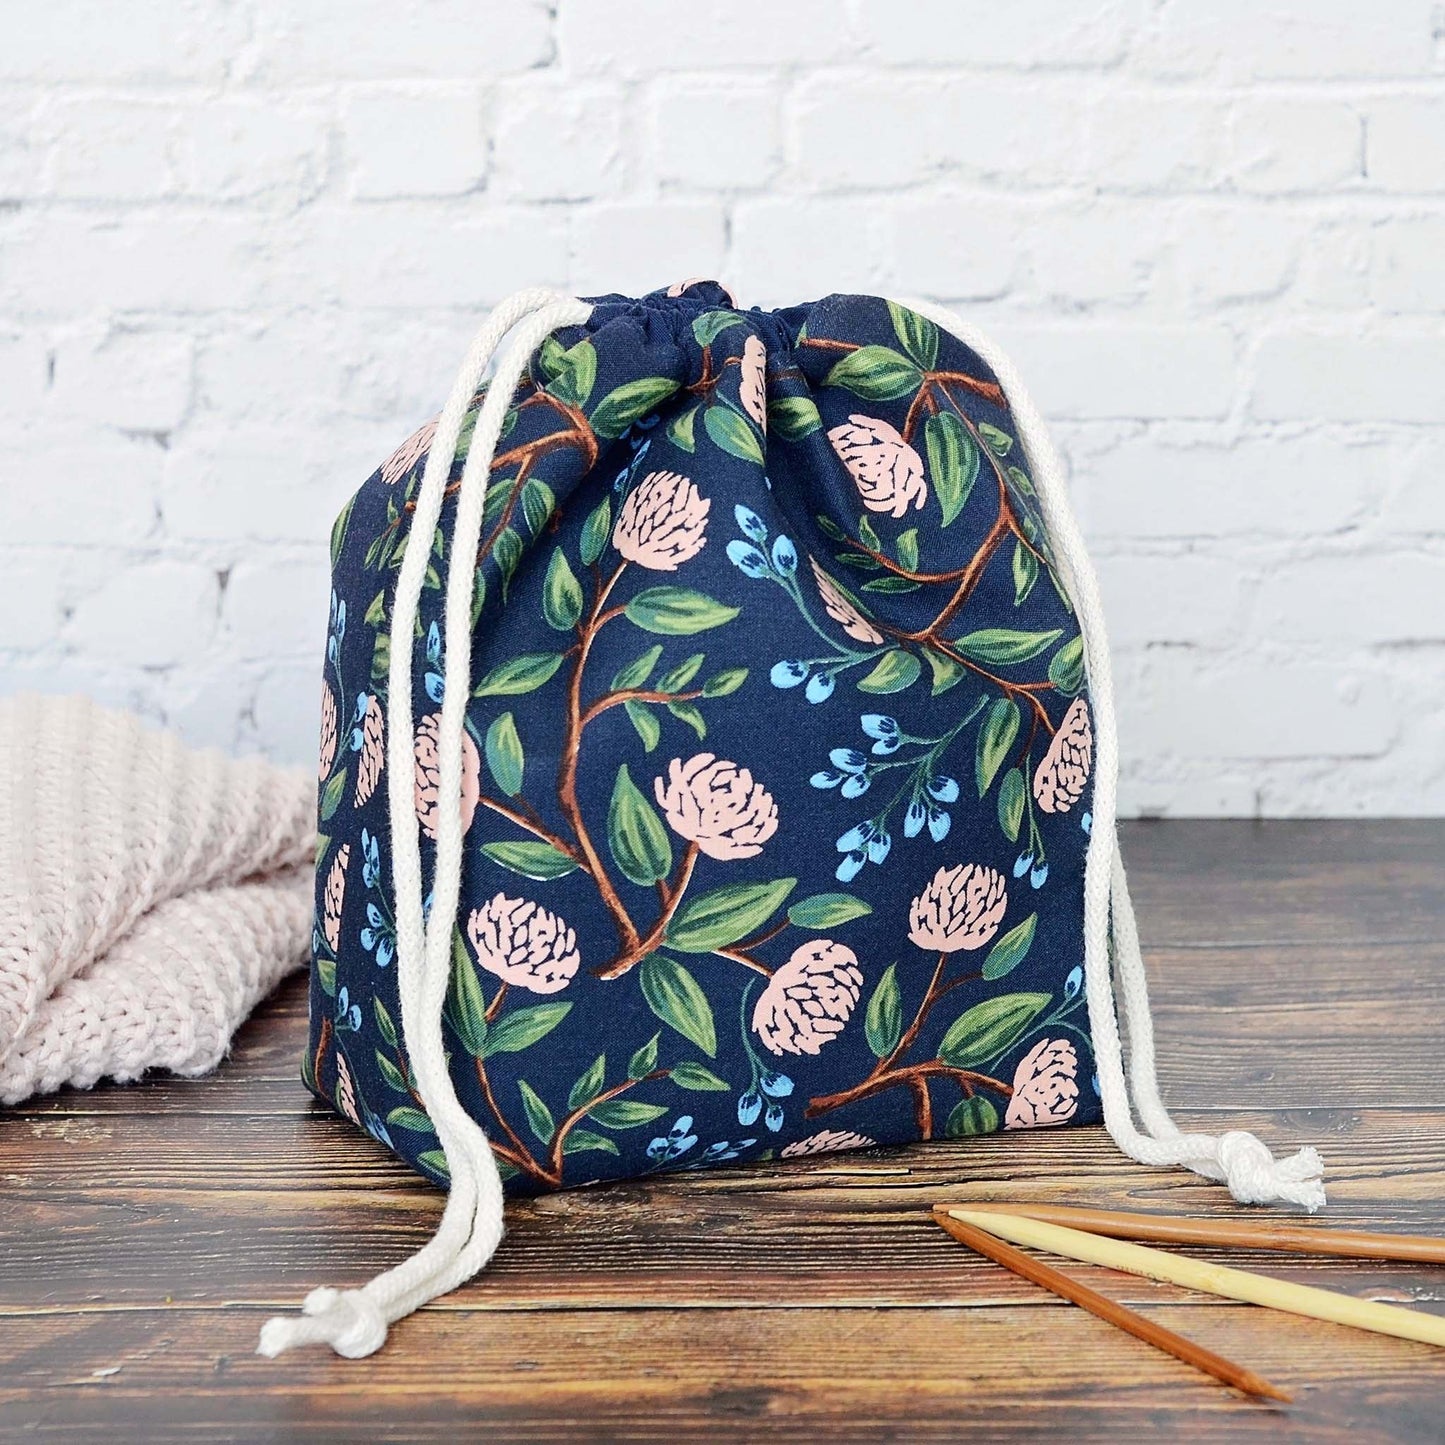 Navy floral drawstring project bag in Rifle Paper Co Peonies cotton.  Made in Canada by Yellow Petal Handmade.